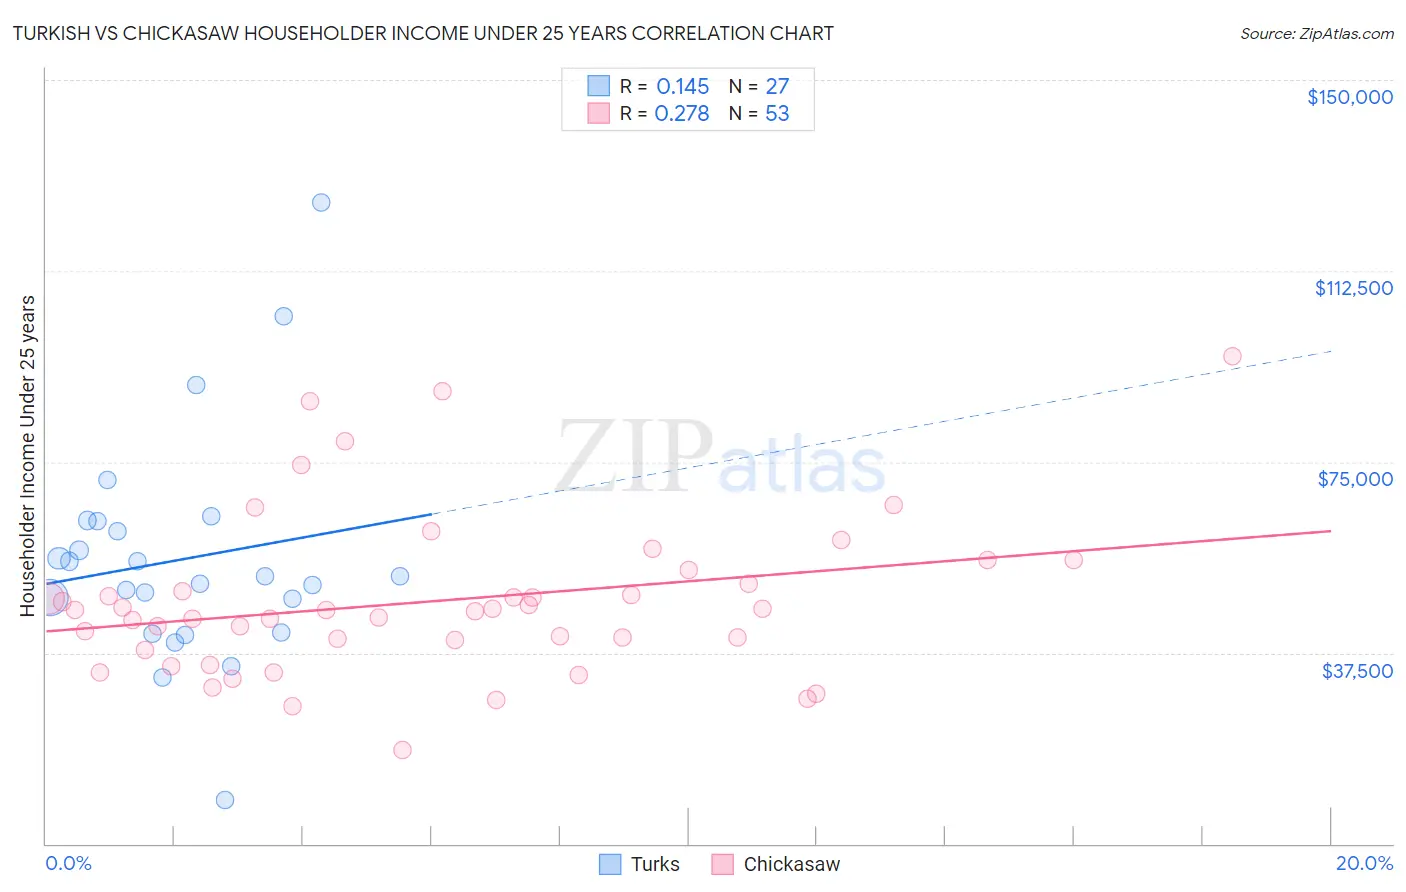 Turkish vs Chickasaw Householder Income Under 25 years